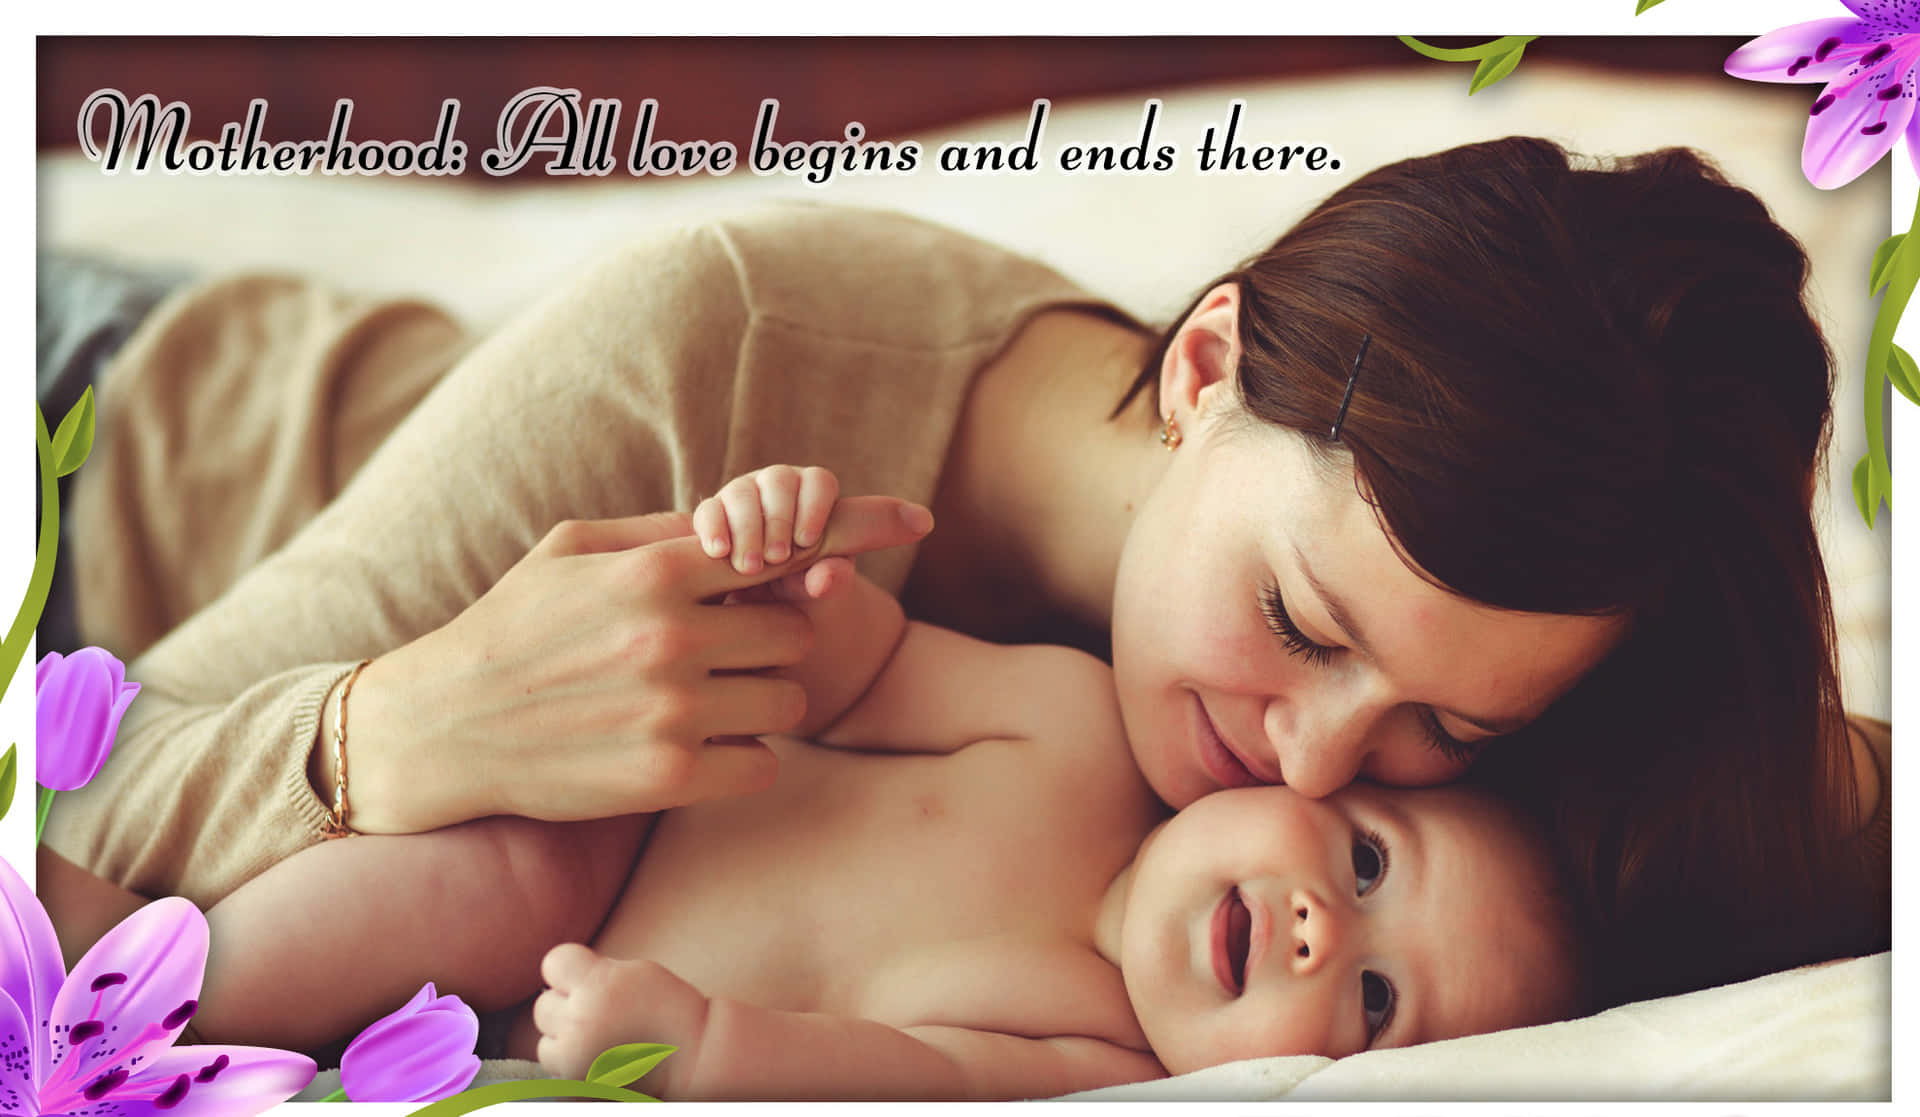 Motherhood Quotes For Mother And Daughter